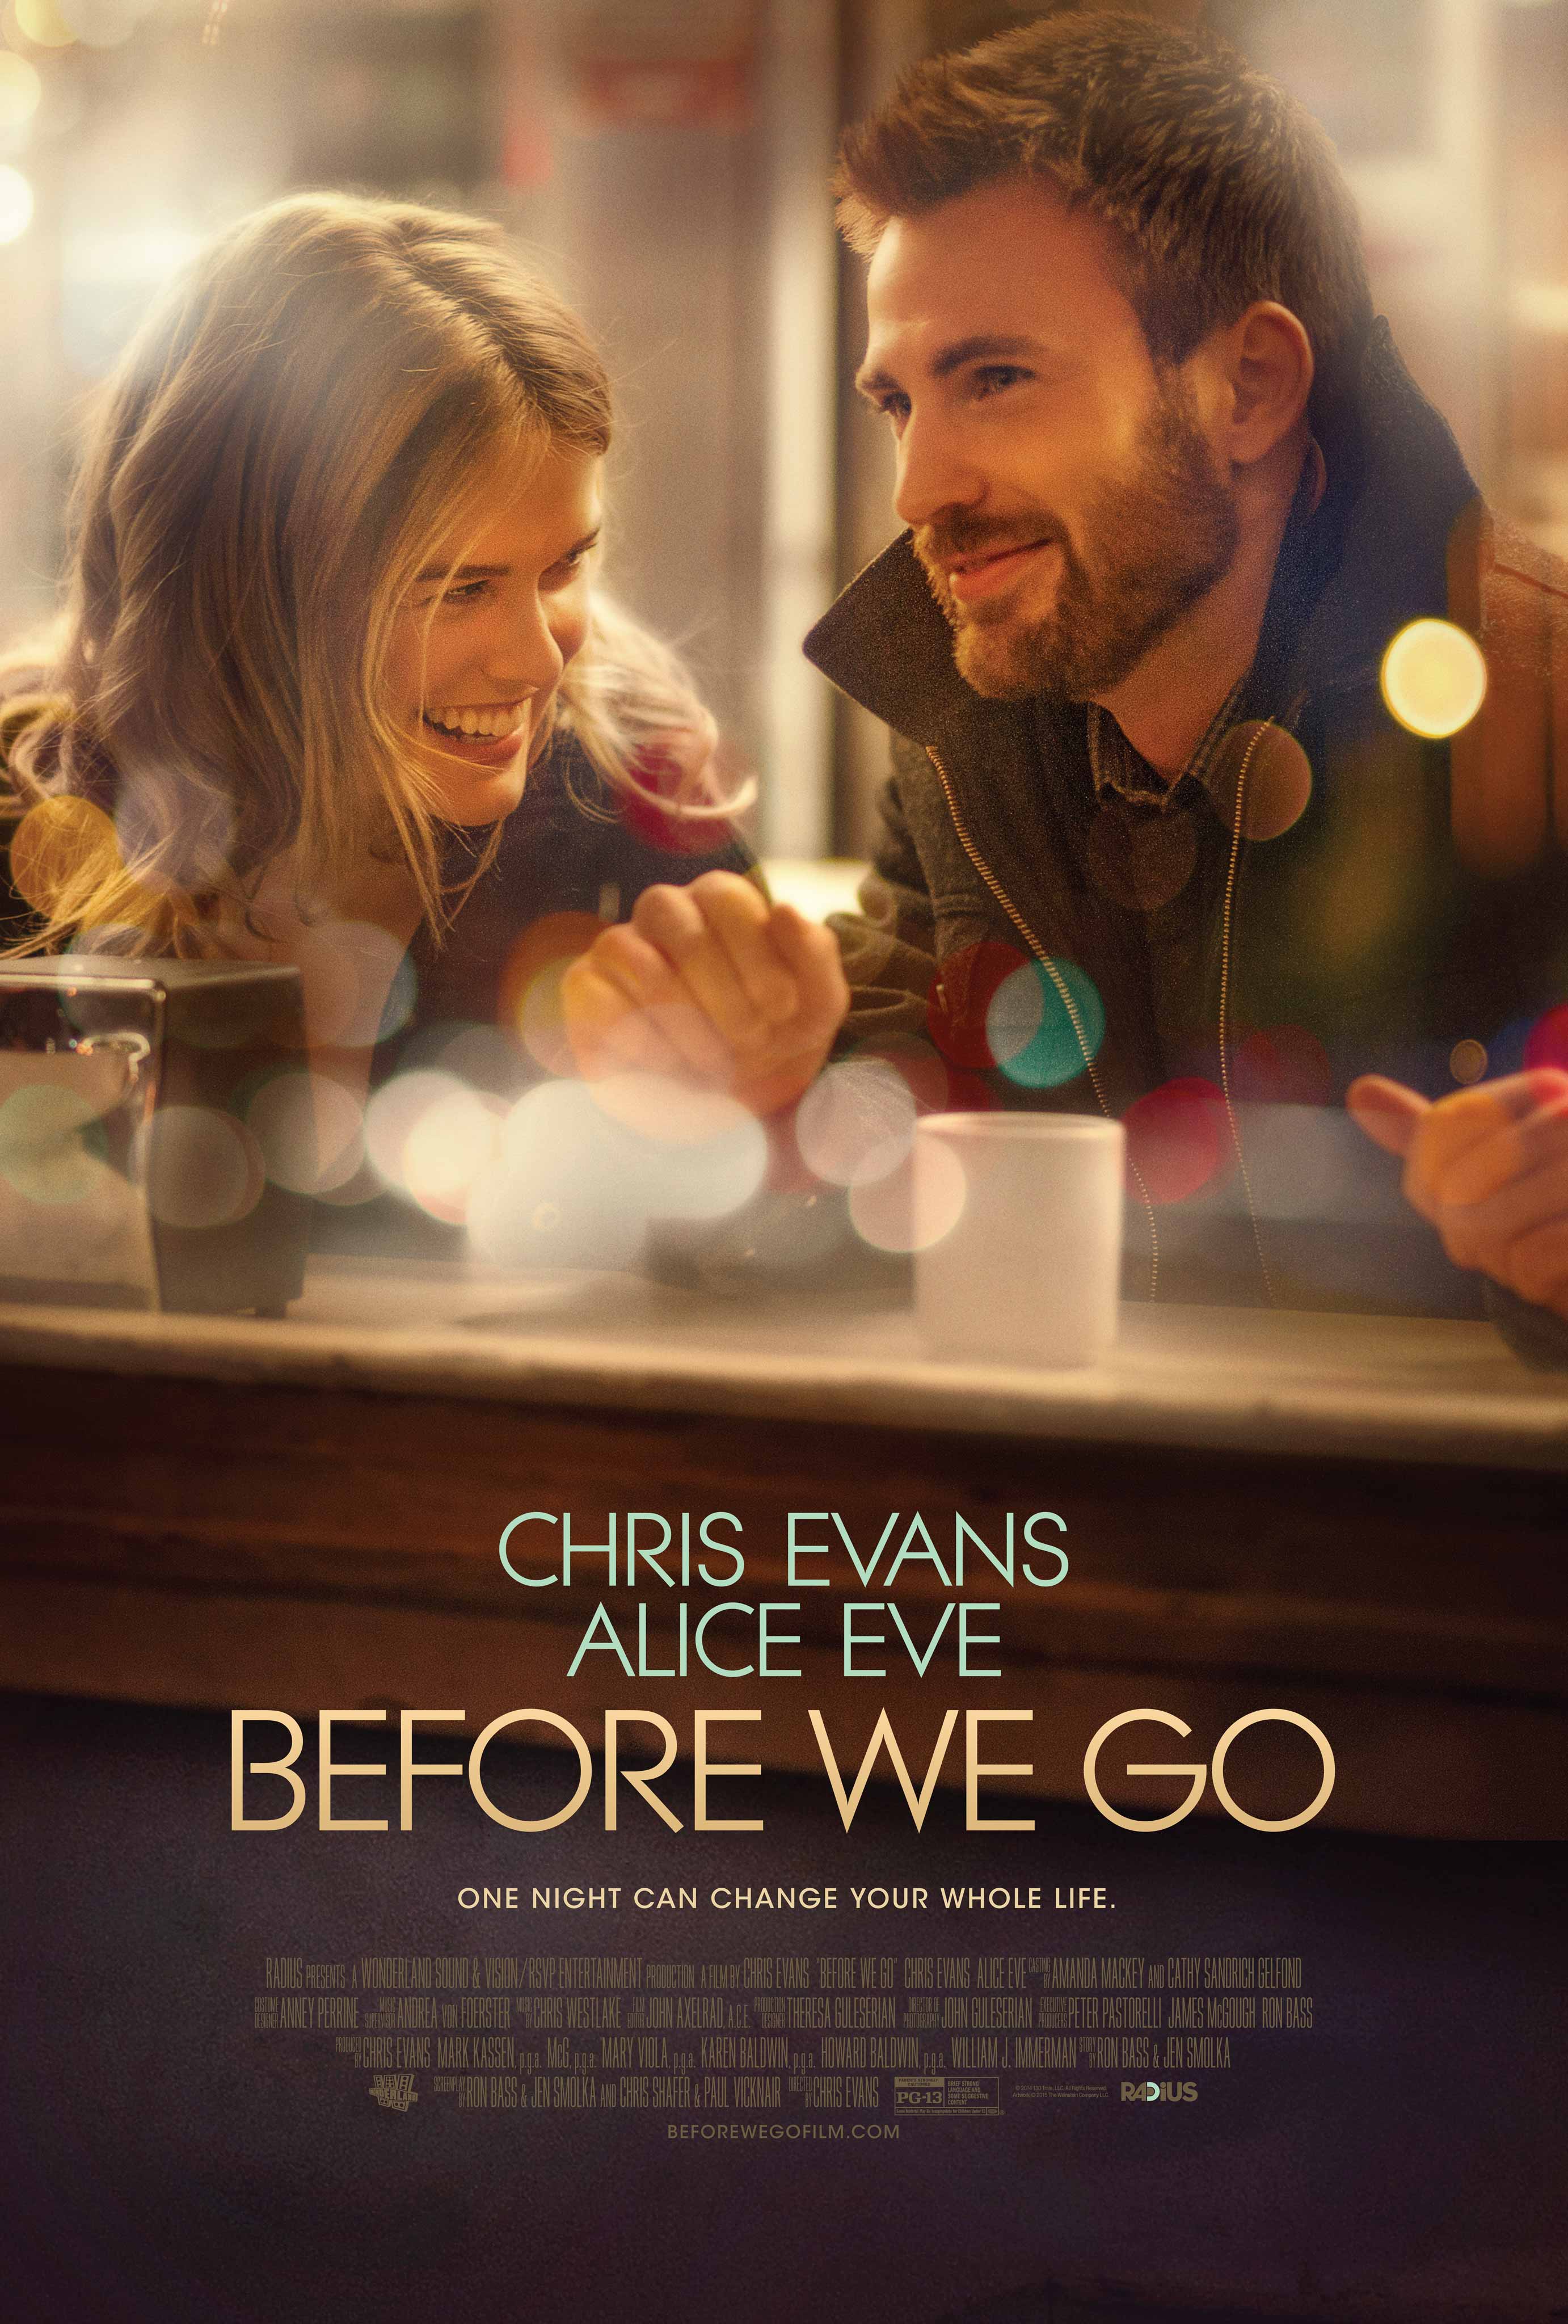 Chris Evans and Alice Eve in Before We Go (2014)